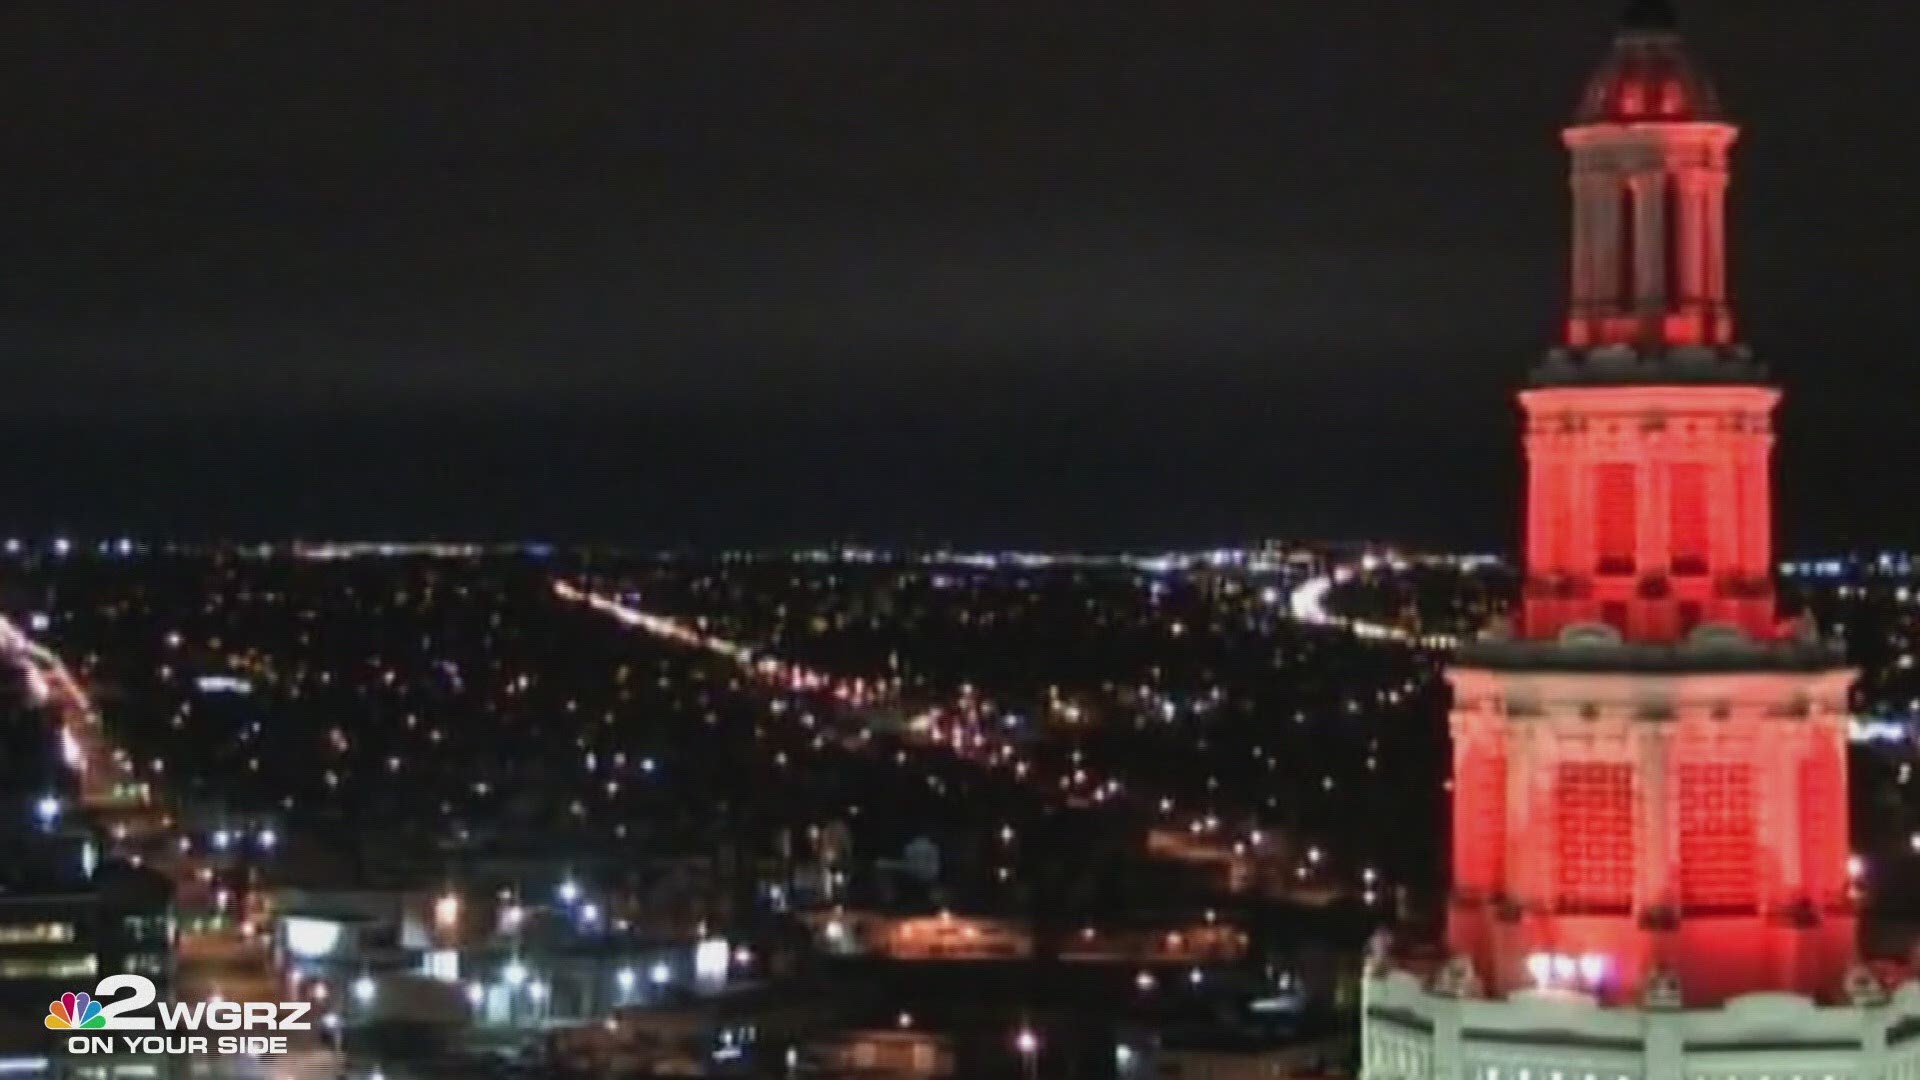 Electric lights up red as reminder that you save a life | wgrz.com